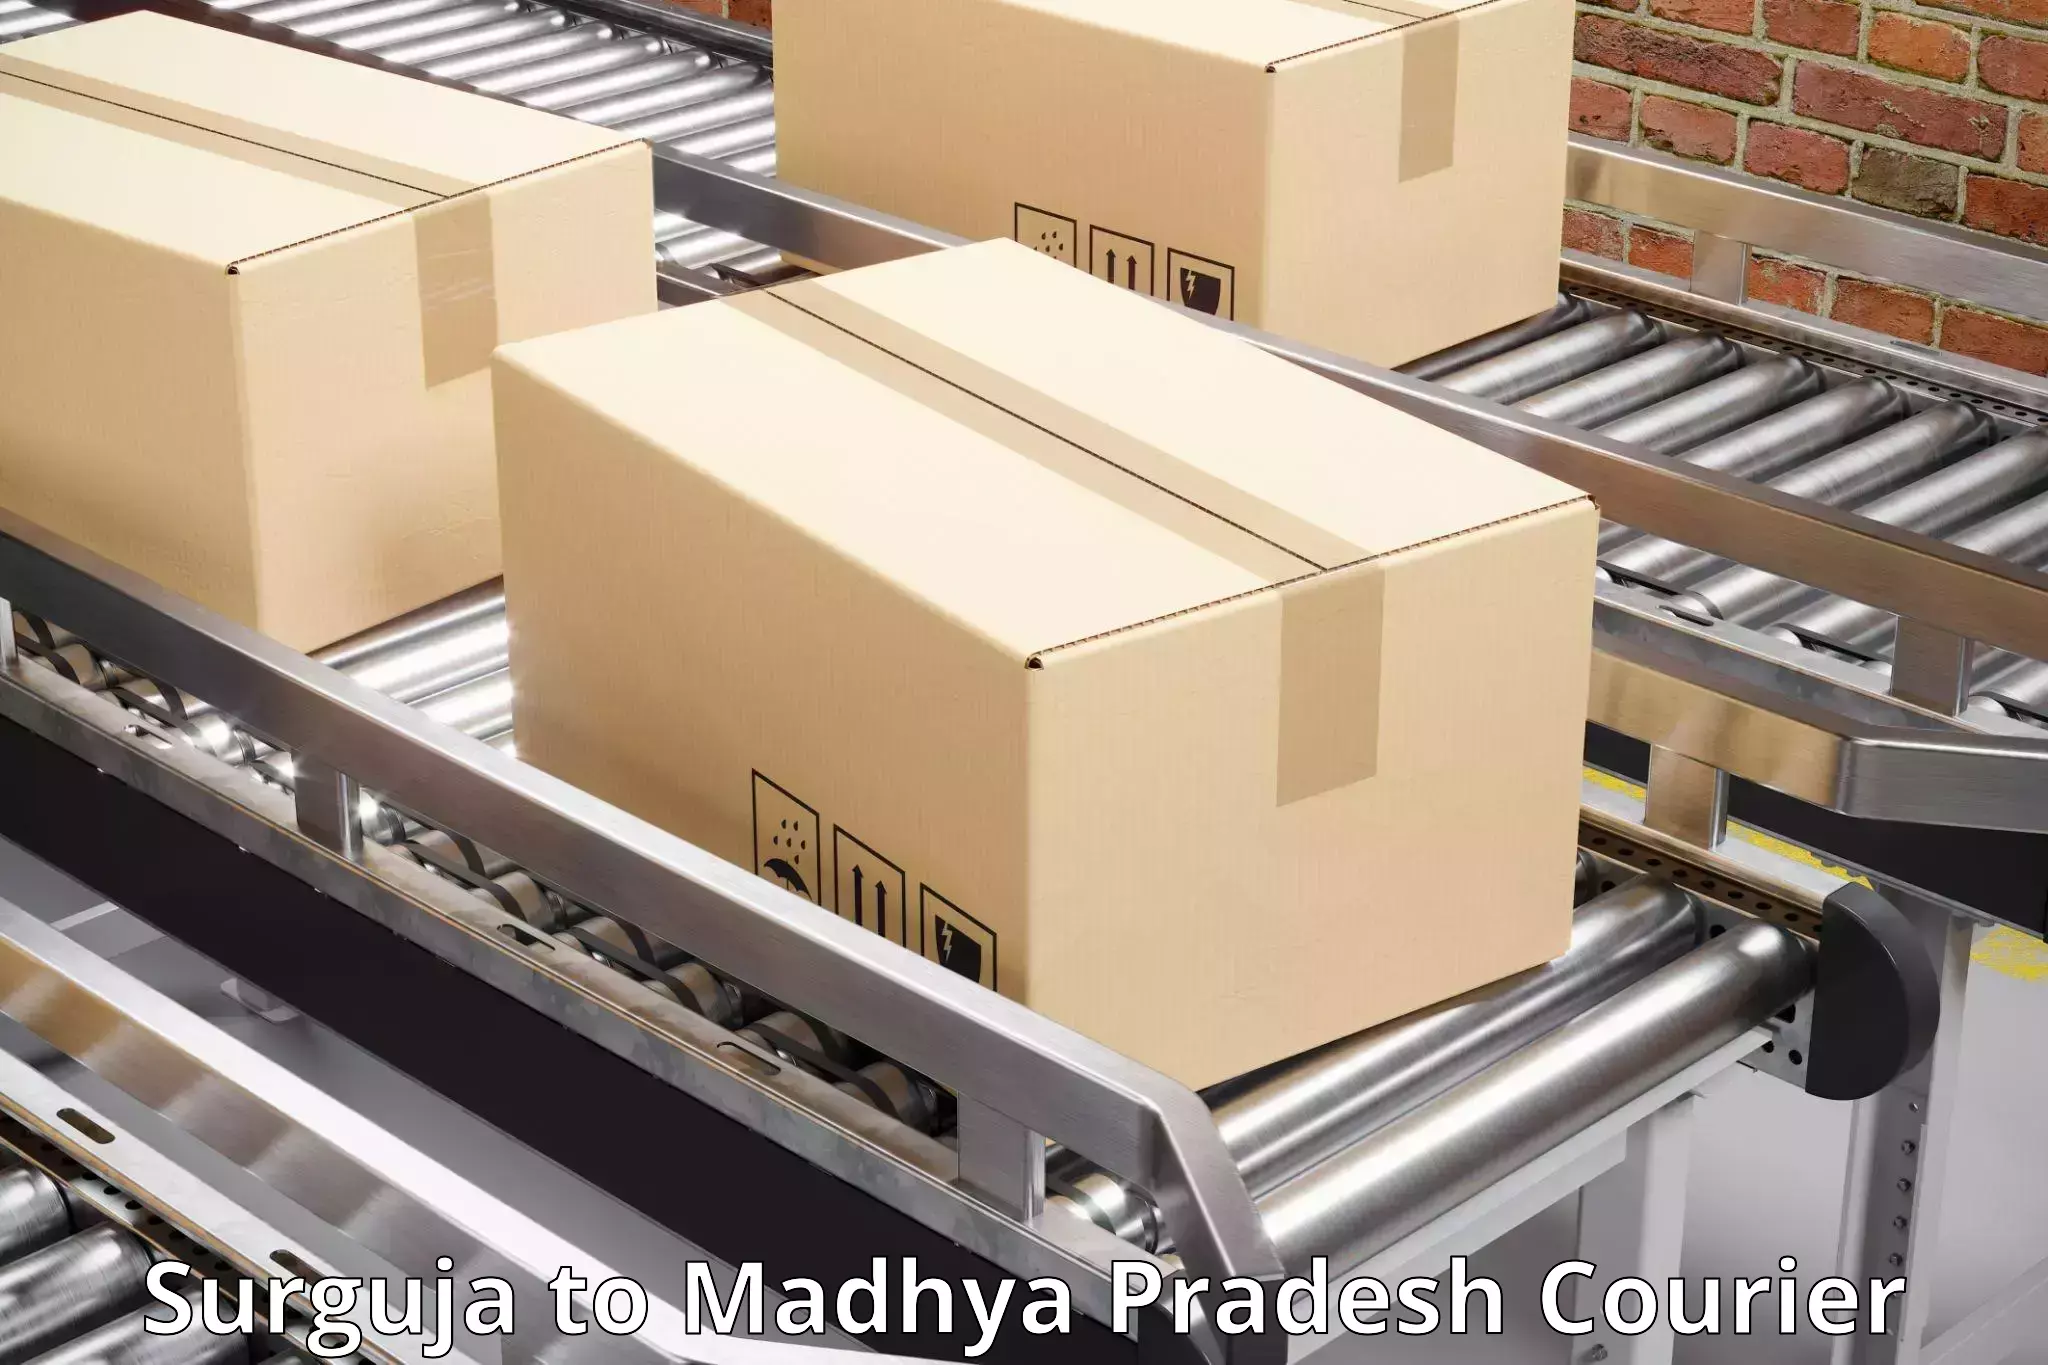 Express delivery capabilities Surguja to Bhopal